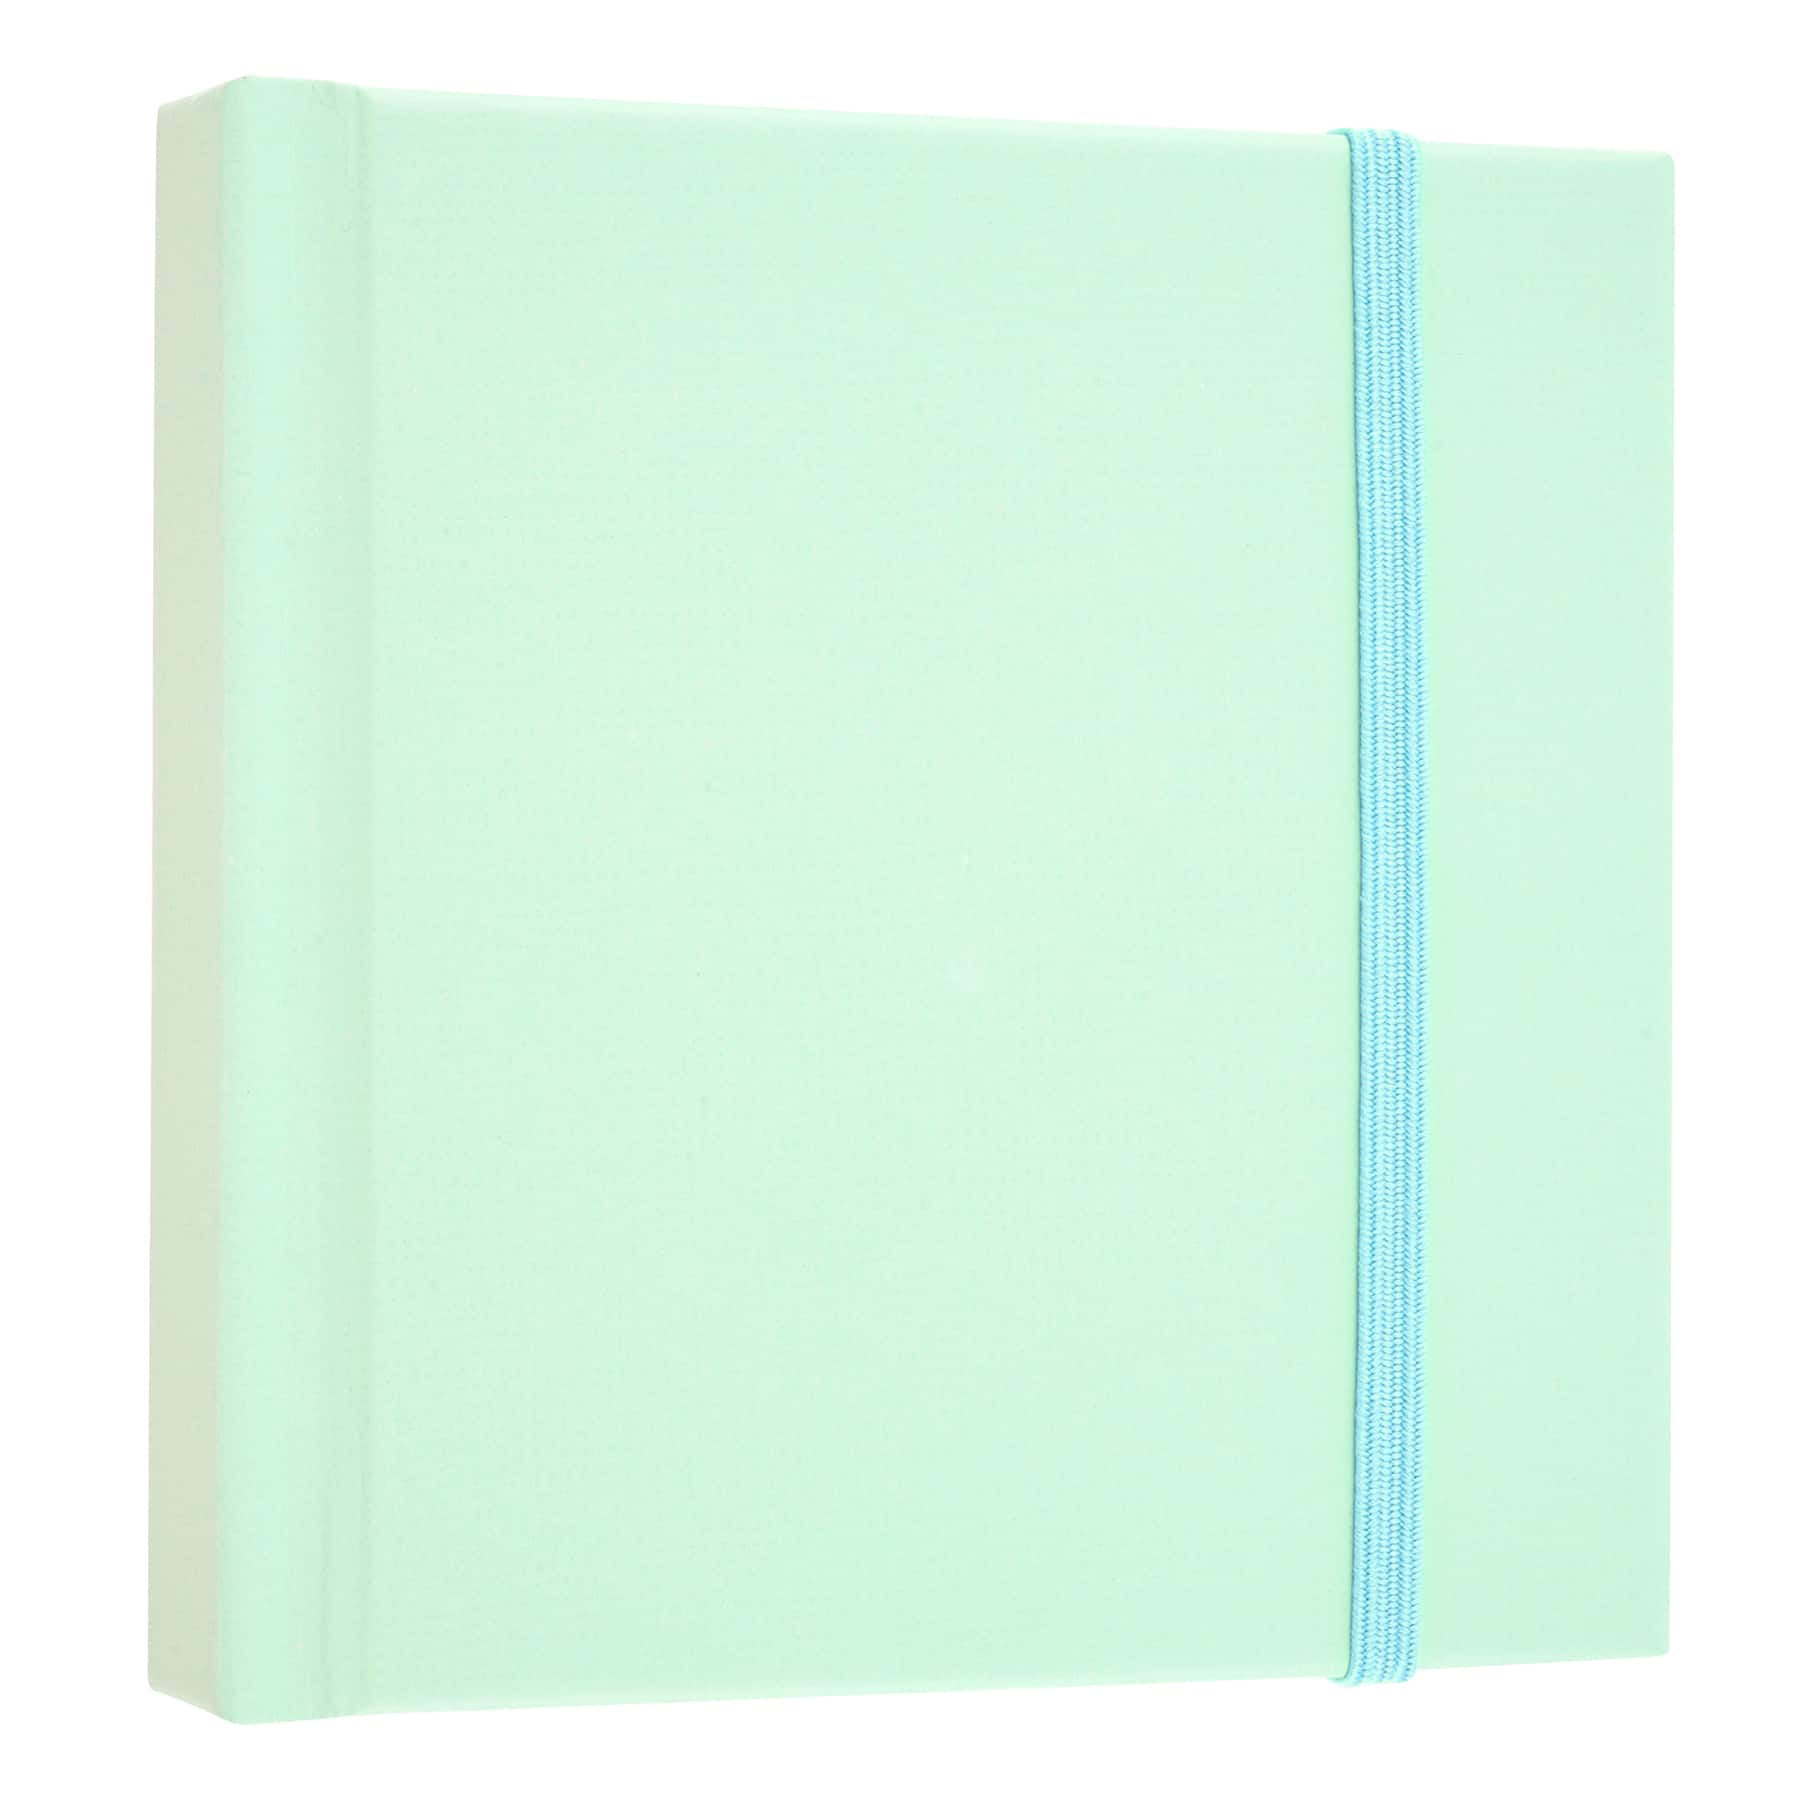 Blue Hardbound Sketchbook by Artist's Loft - Acid Free and Smudge Resistant  Paper, Sketch Pad for Drawing, Sketching, Writing - 1 Pack